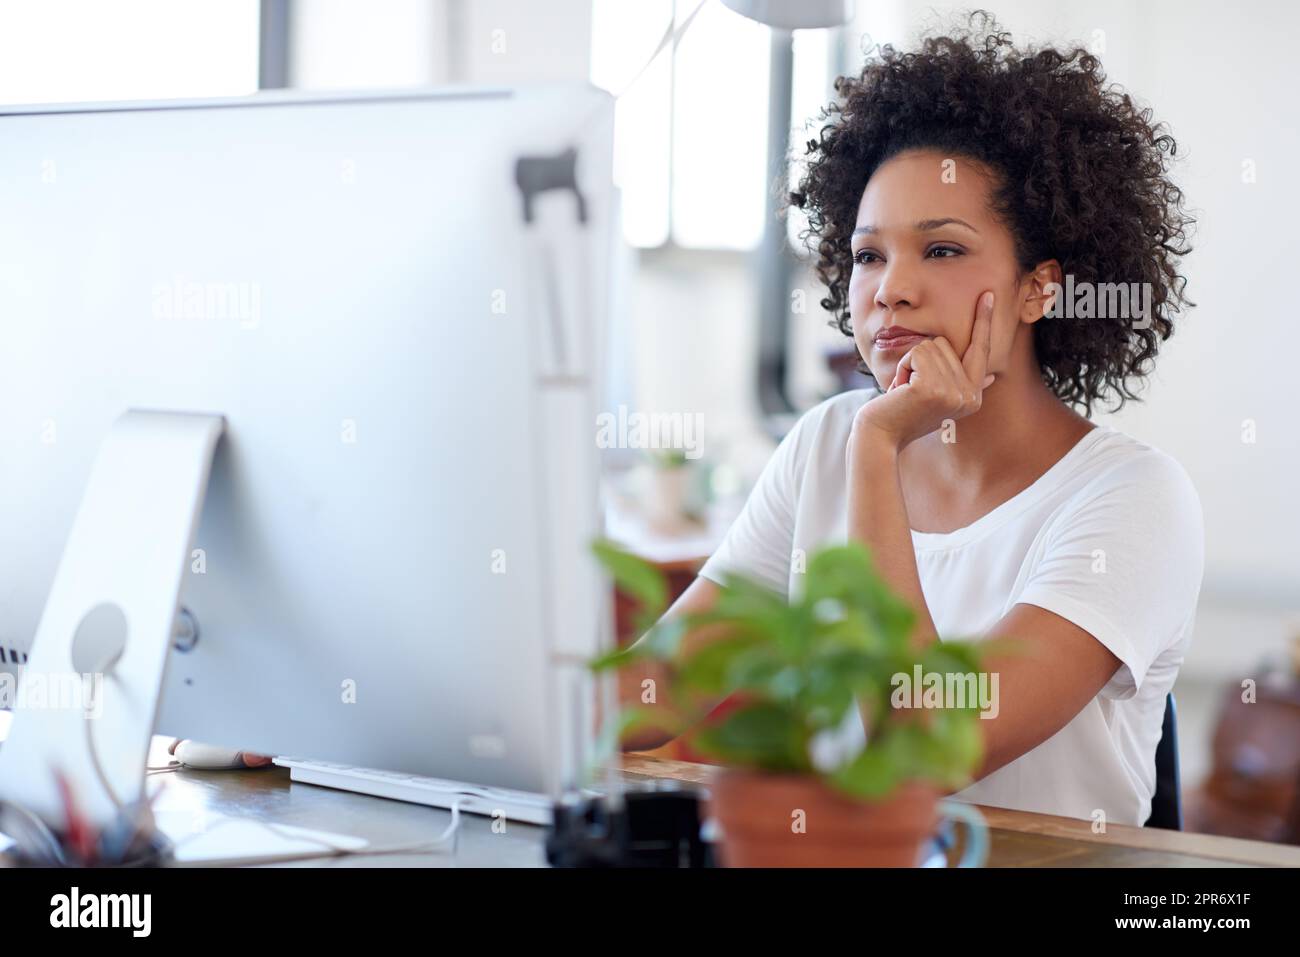 Keeping up to date with online developments. Beautiful creative professional looking intently at her pc in a bright open plan office space. Stock Photo